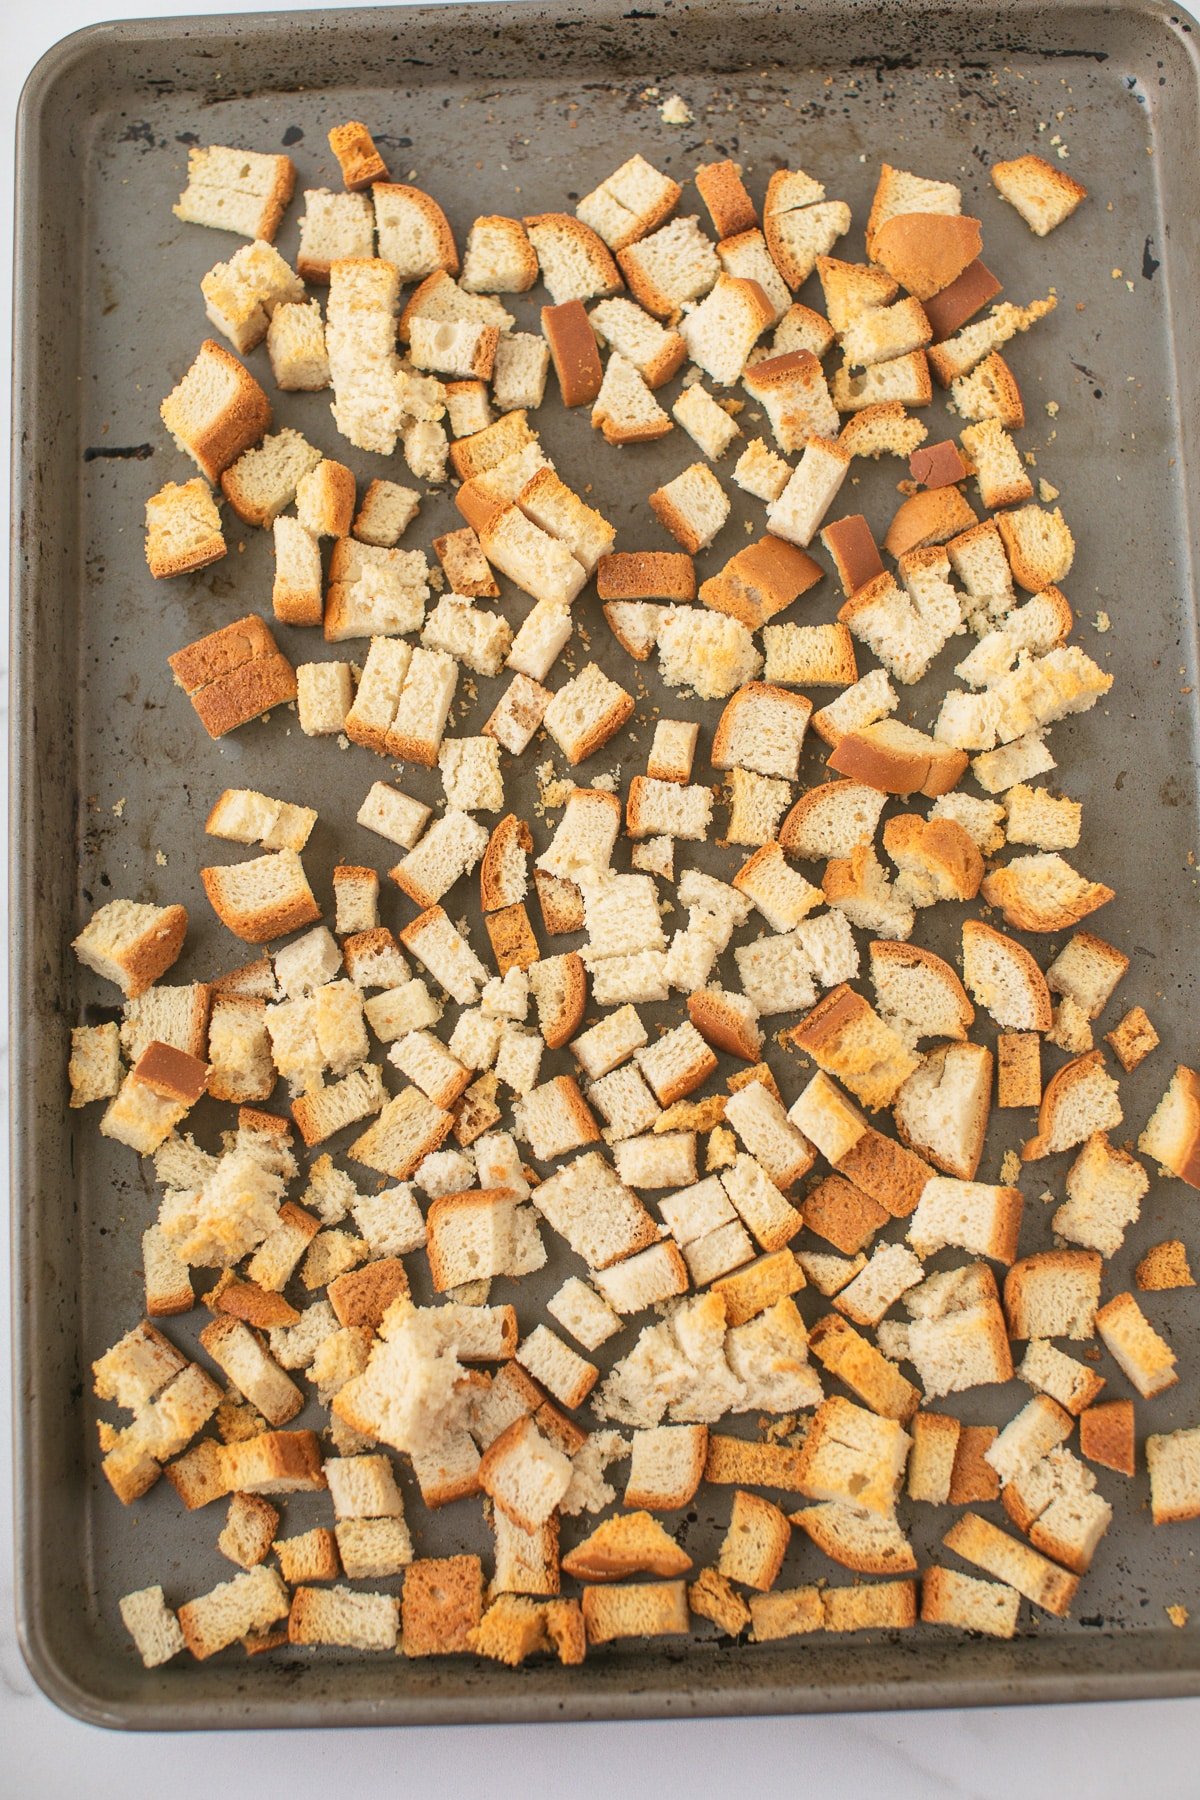 dried bread cubes for stuffing.